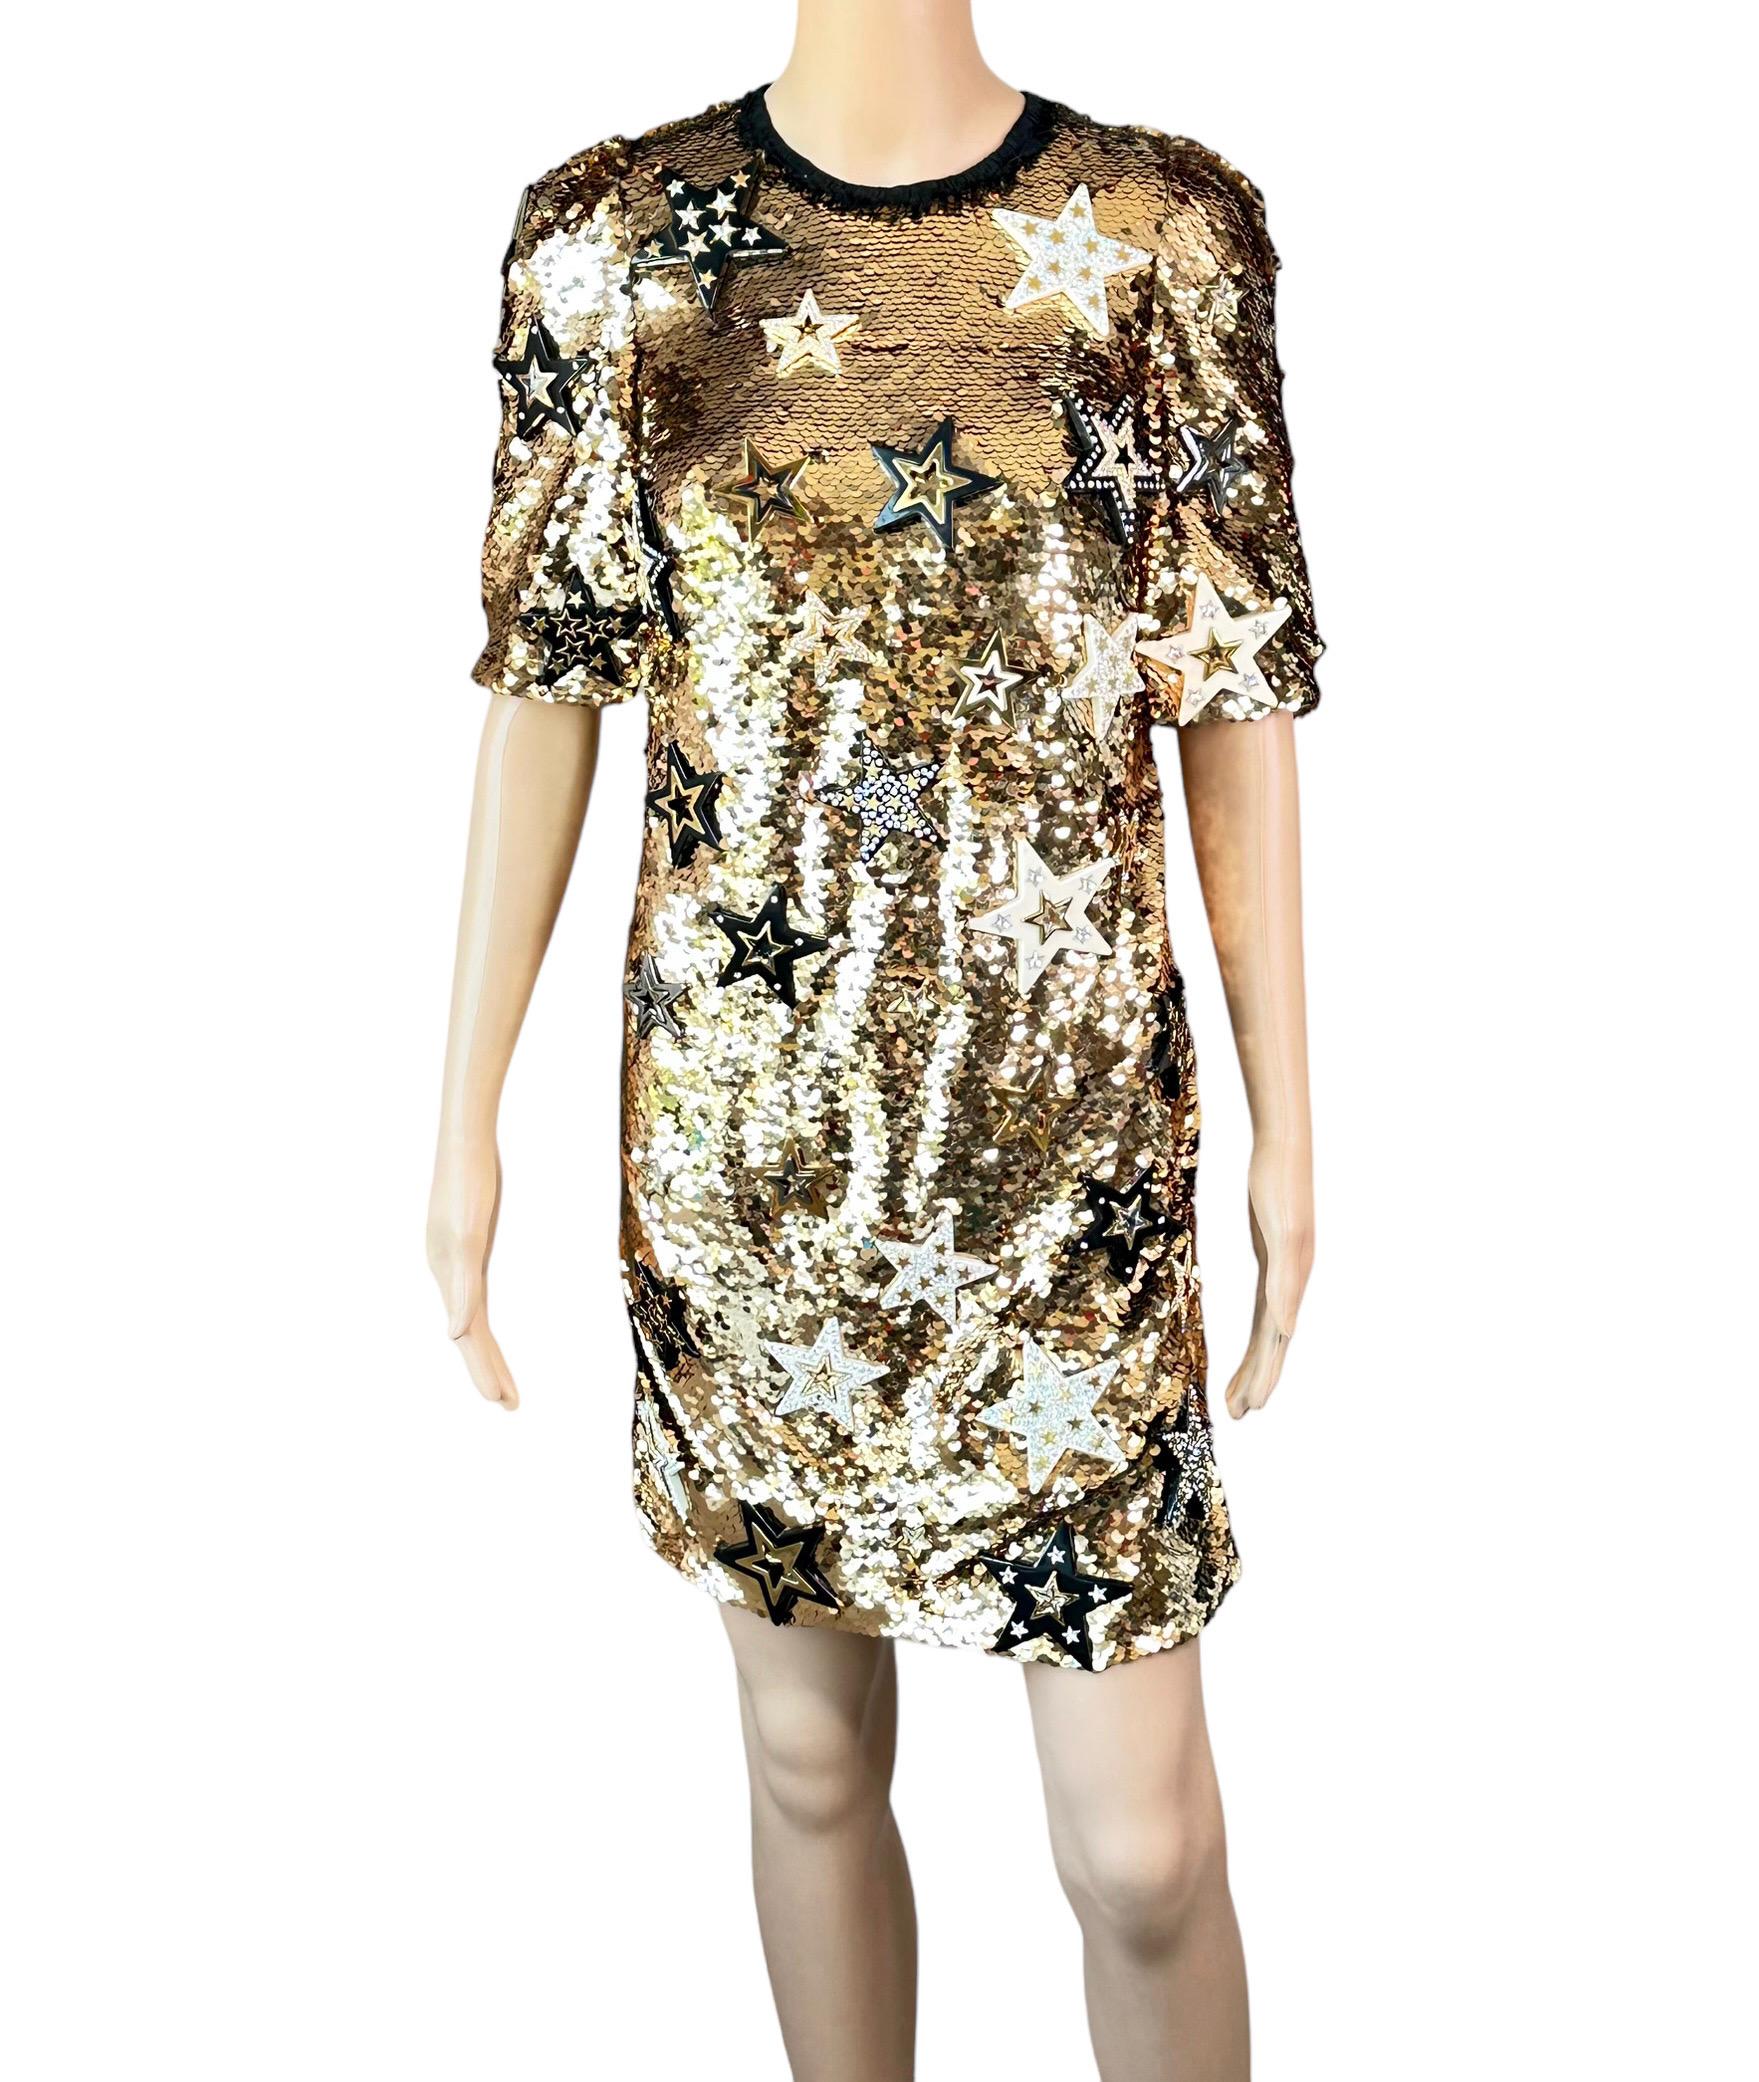 Dolce & Gabbana F/W 2011 Runway Unworn Embellished Star Sequined Gold Mini Dress In New Condition For Sale In Naples, FL